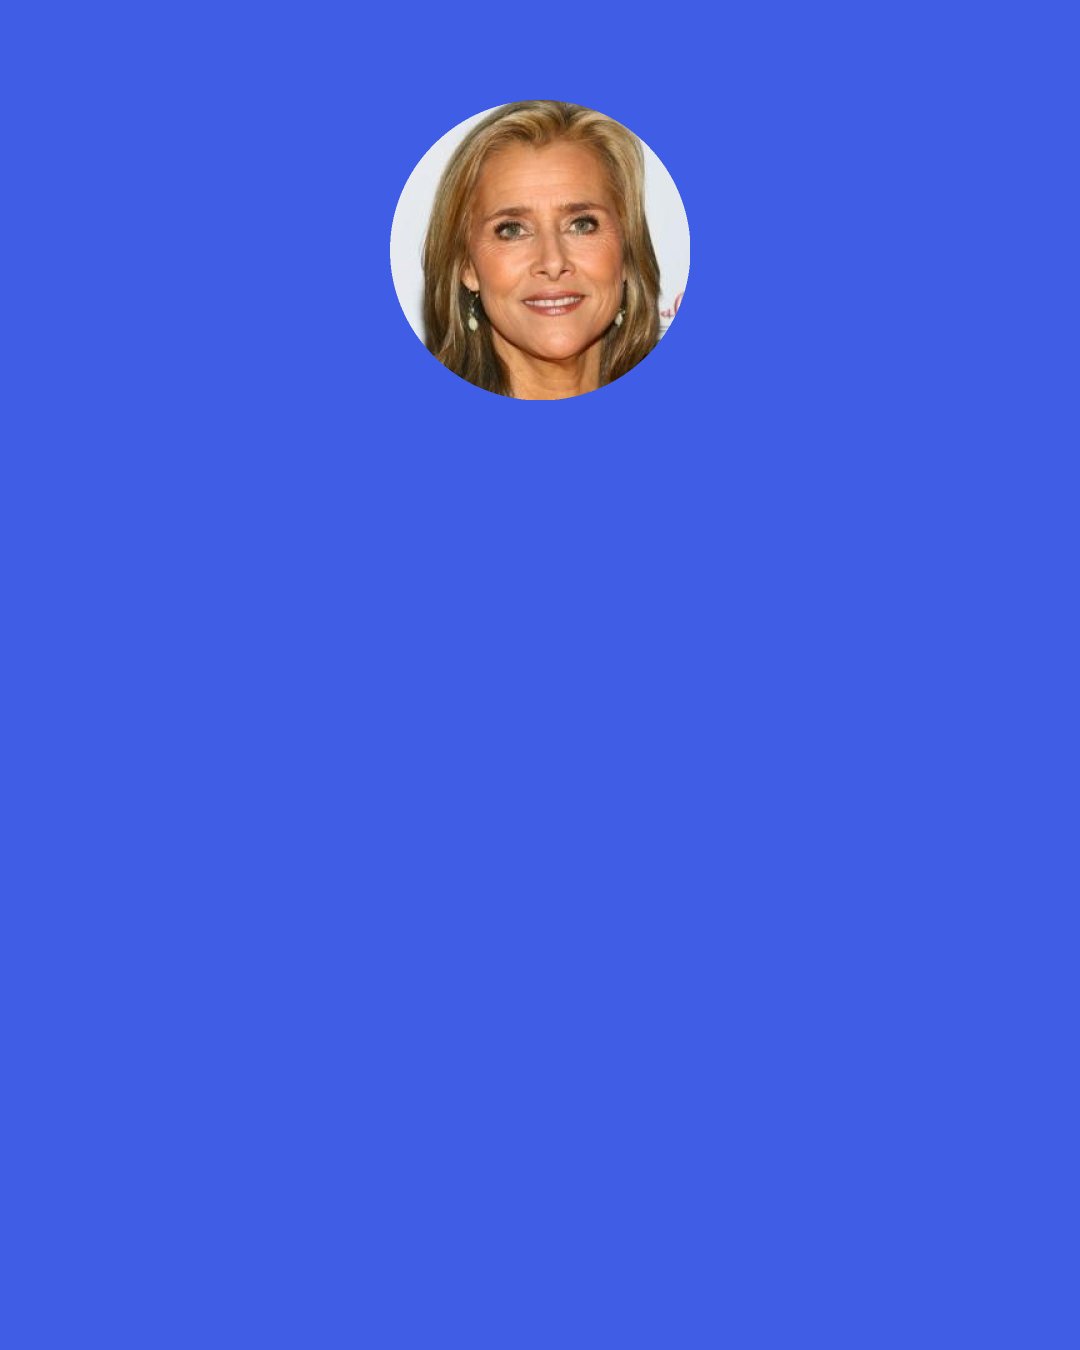 Meredith Vieira: I like to live in the present. I struggle with that, though, because - even for all of this "letting your life flow" stuff - I also have anxieties.